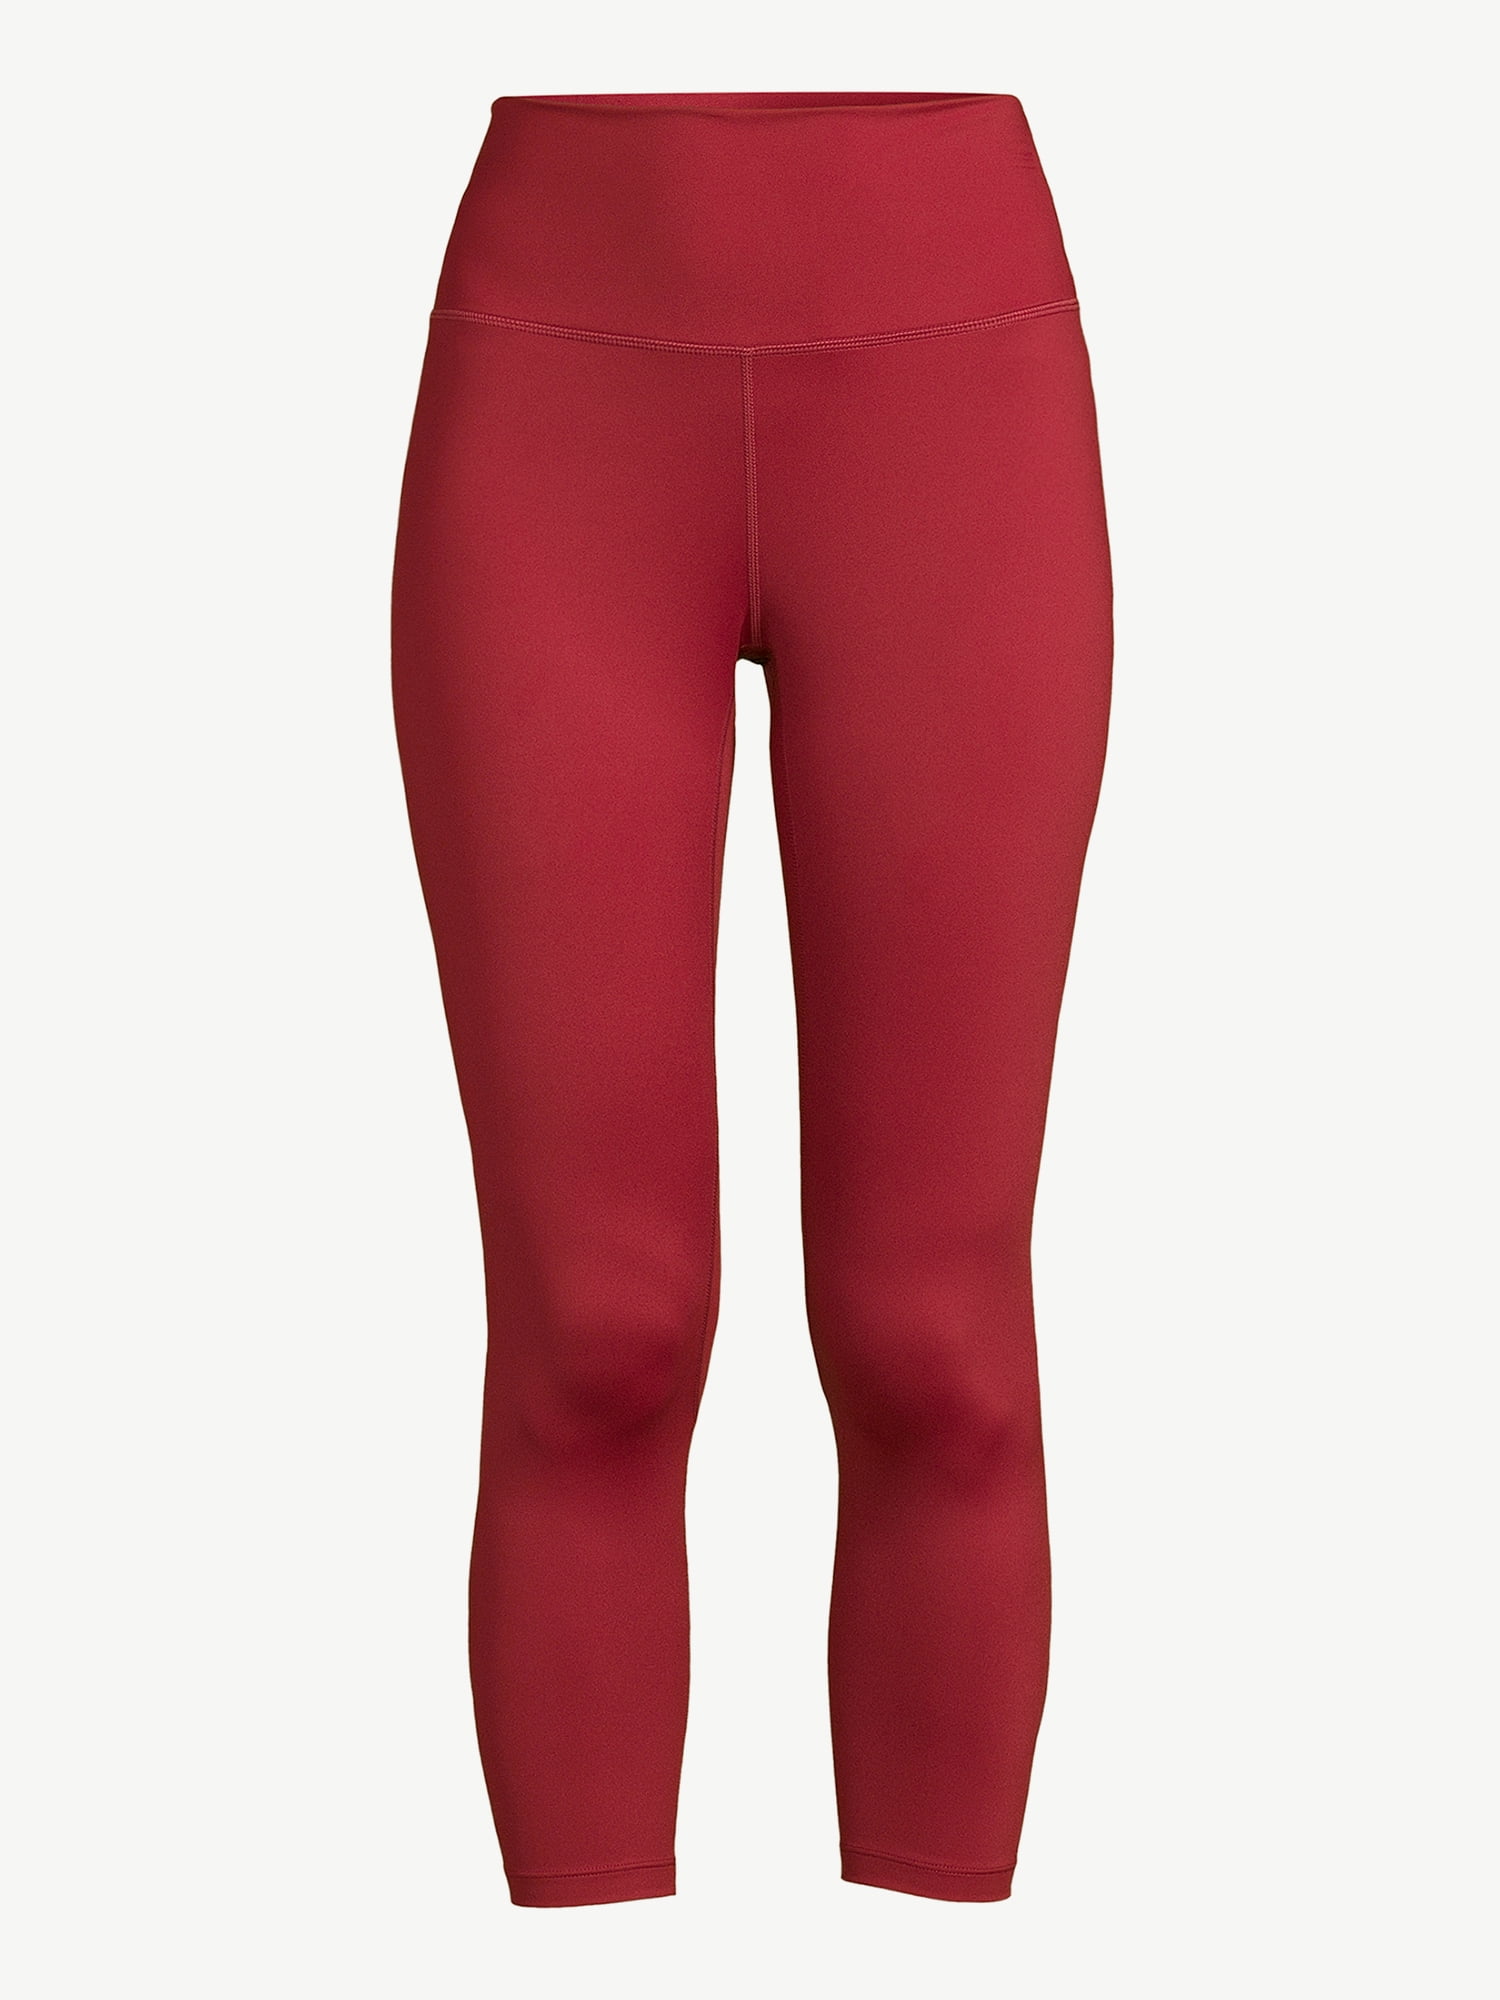 Buy SHAPERX Women's Activewear High Waisted Cotton/Spandex Full Length  Legging (RED) PAACK of 1 (XS) at